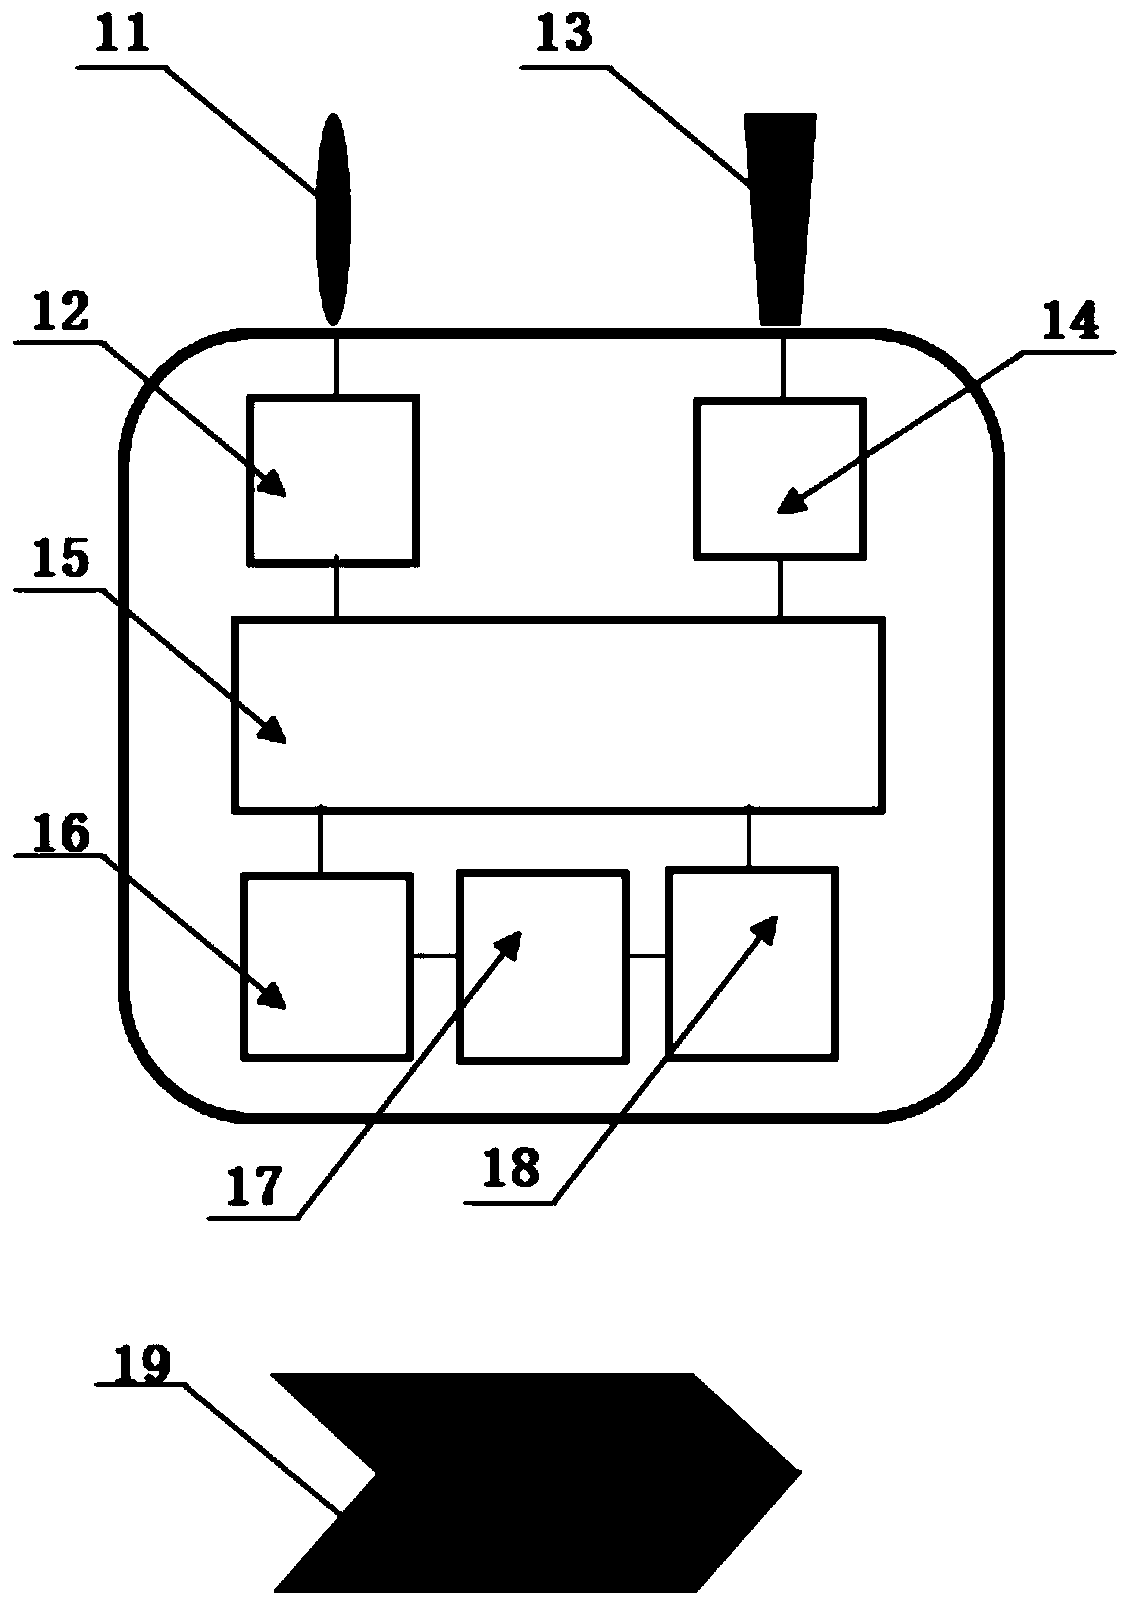 Partial discharge positioning device and method for power equipment inspection unmanned aerial vehicle